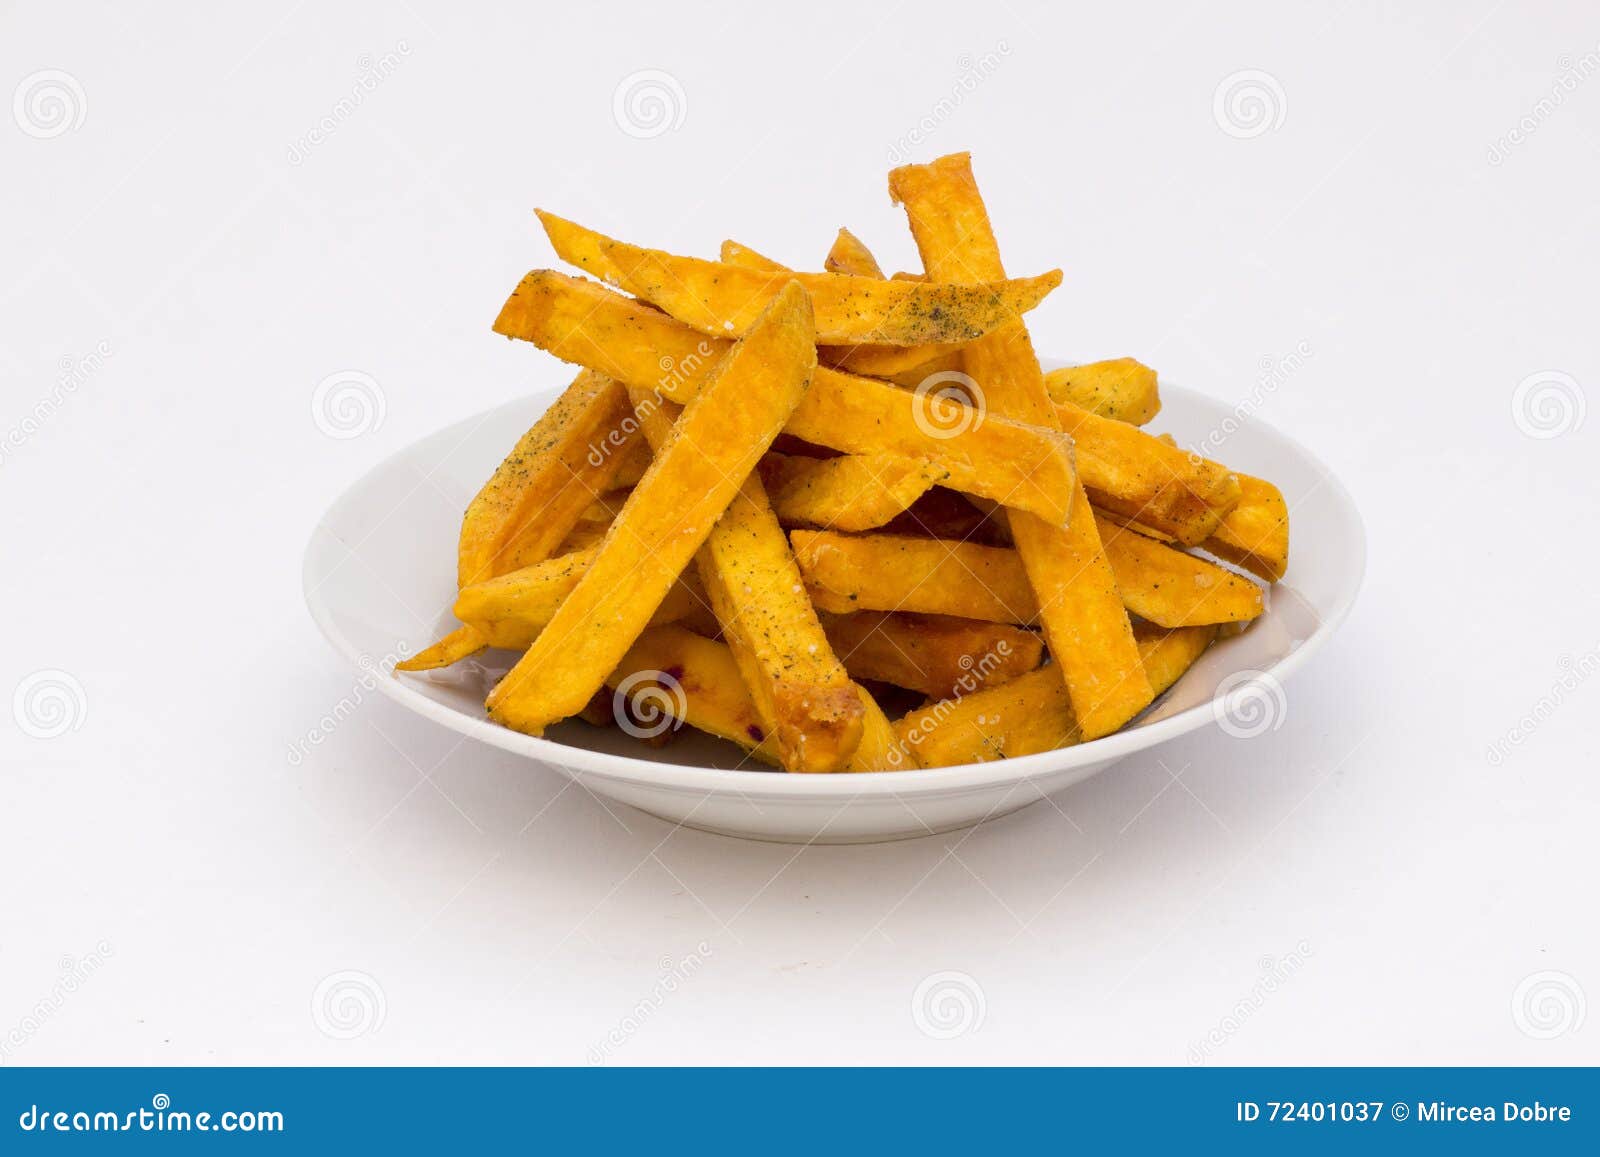 sweet potato or kumara fries called camote product from south america. it's a dicotyledonous plant that belongs